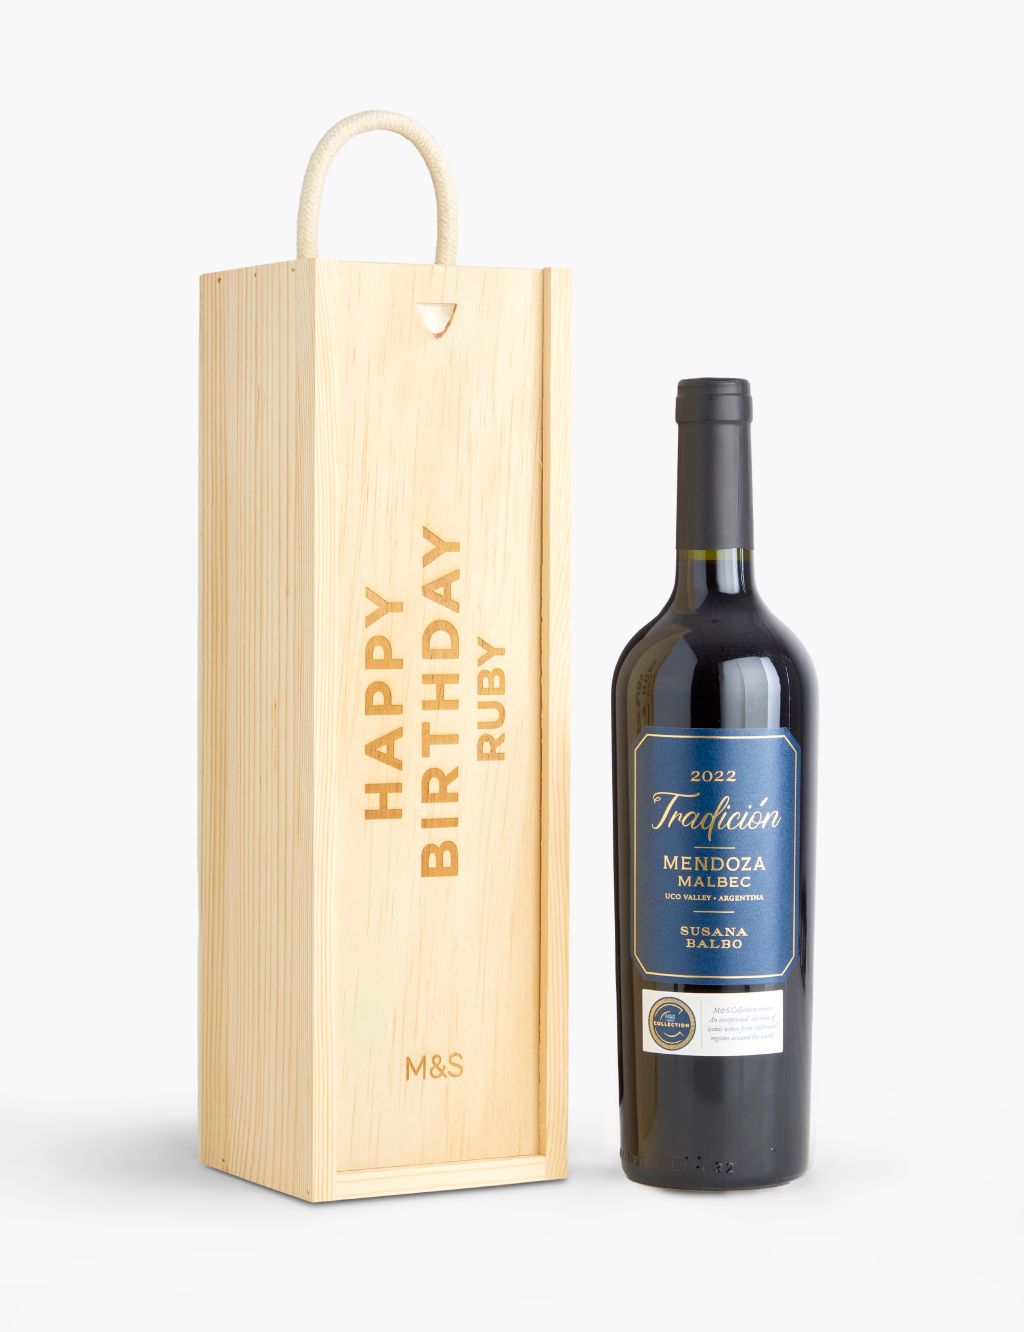 Personalised M&S Collection Susana Balbo Malbec Gift